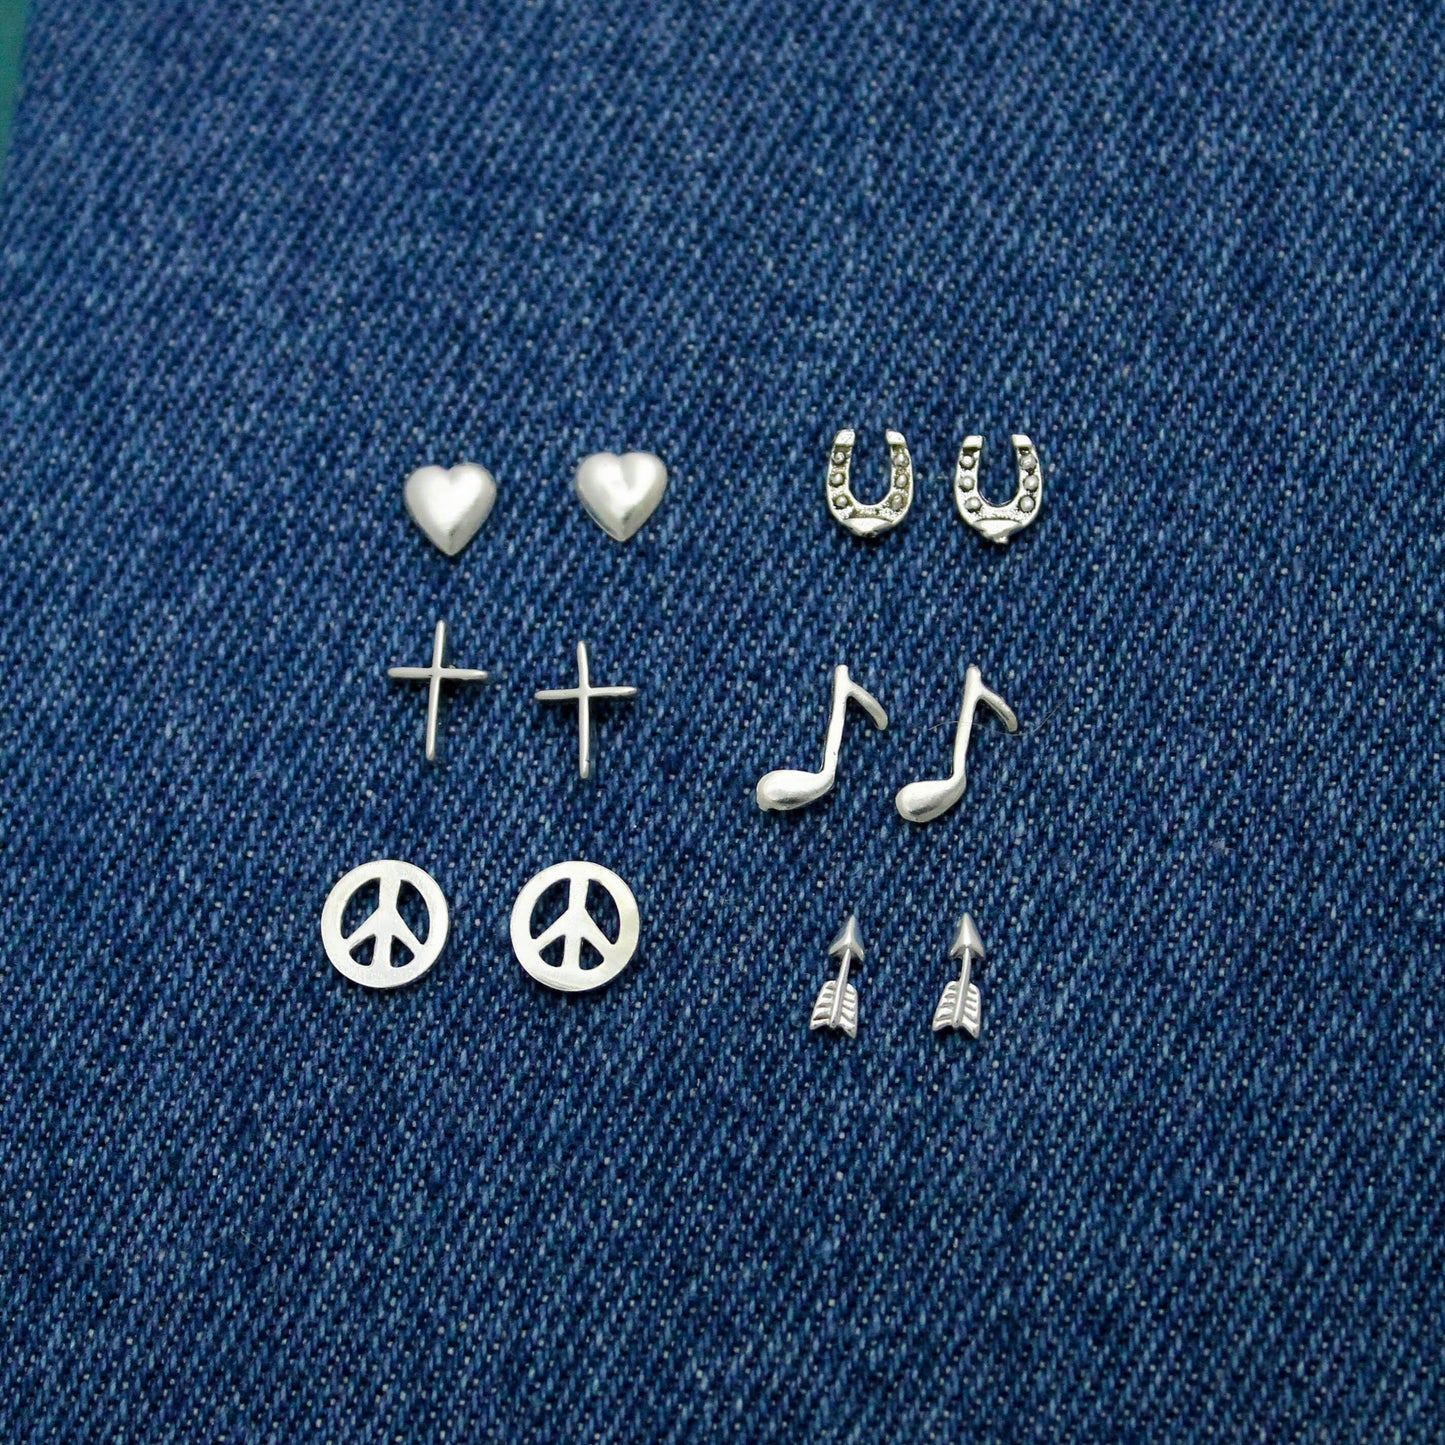 Cute Studs in Sterling Silver Hearts, Horse Shoes, Peace, Music Notes, Cross and Arrows, Minimalist Silver Stud Earrings, Cute Gift for Her